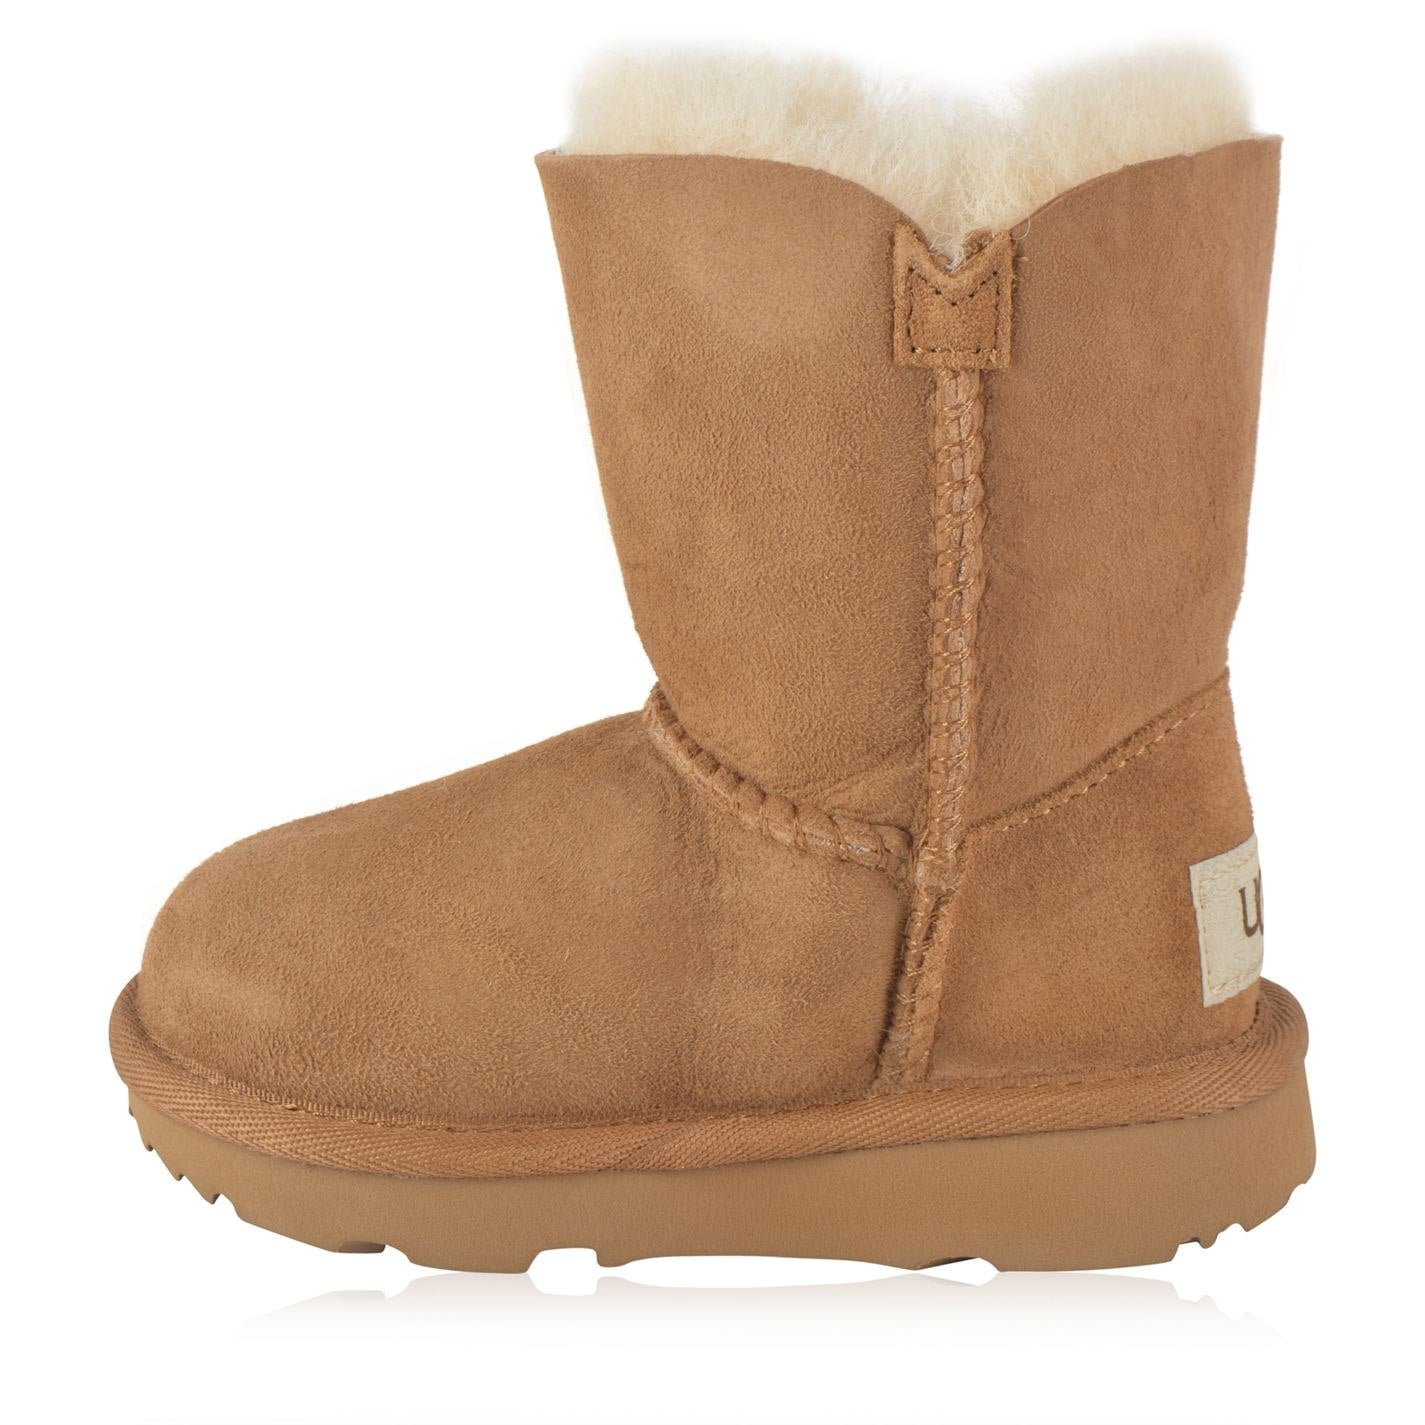 Kids Ugg Bailey Button Boots